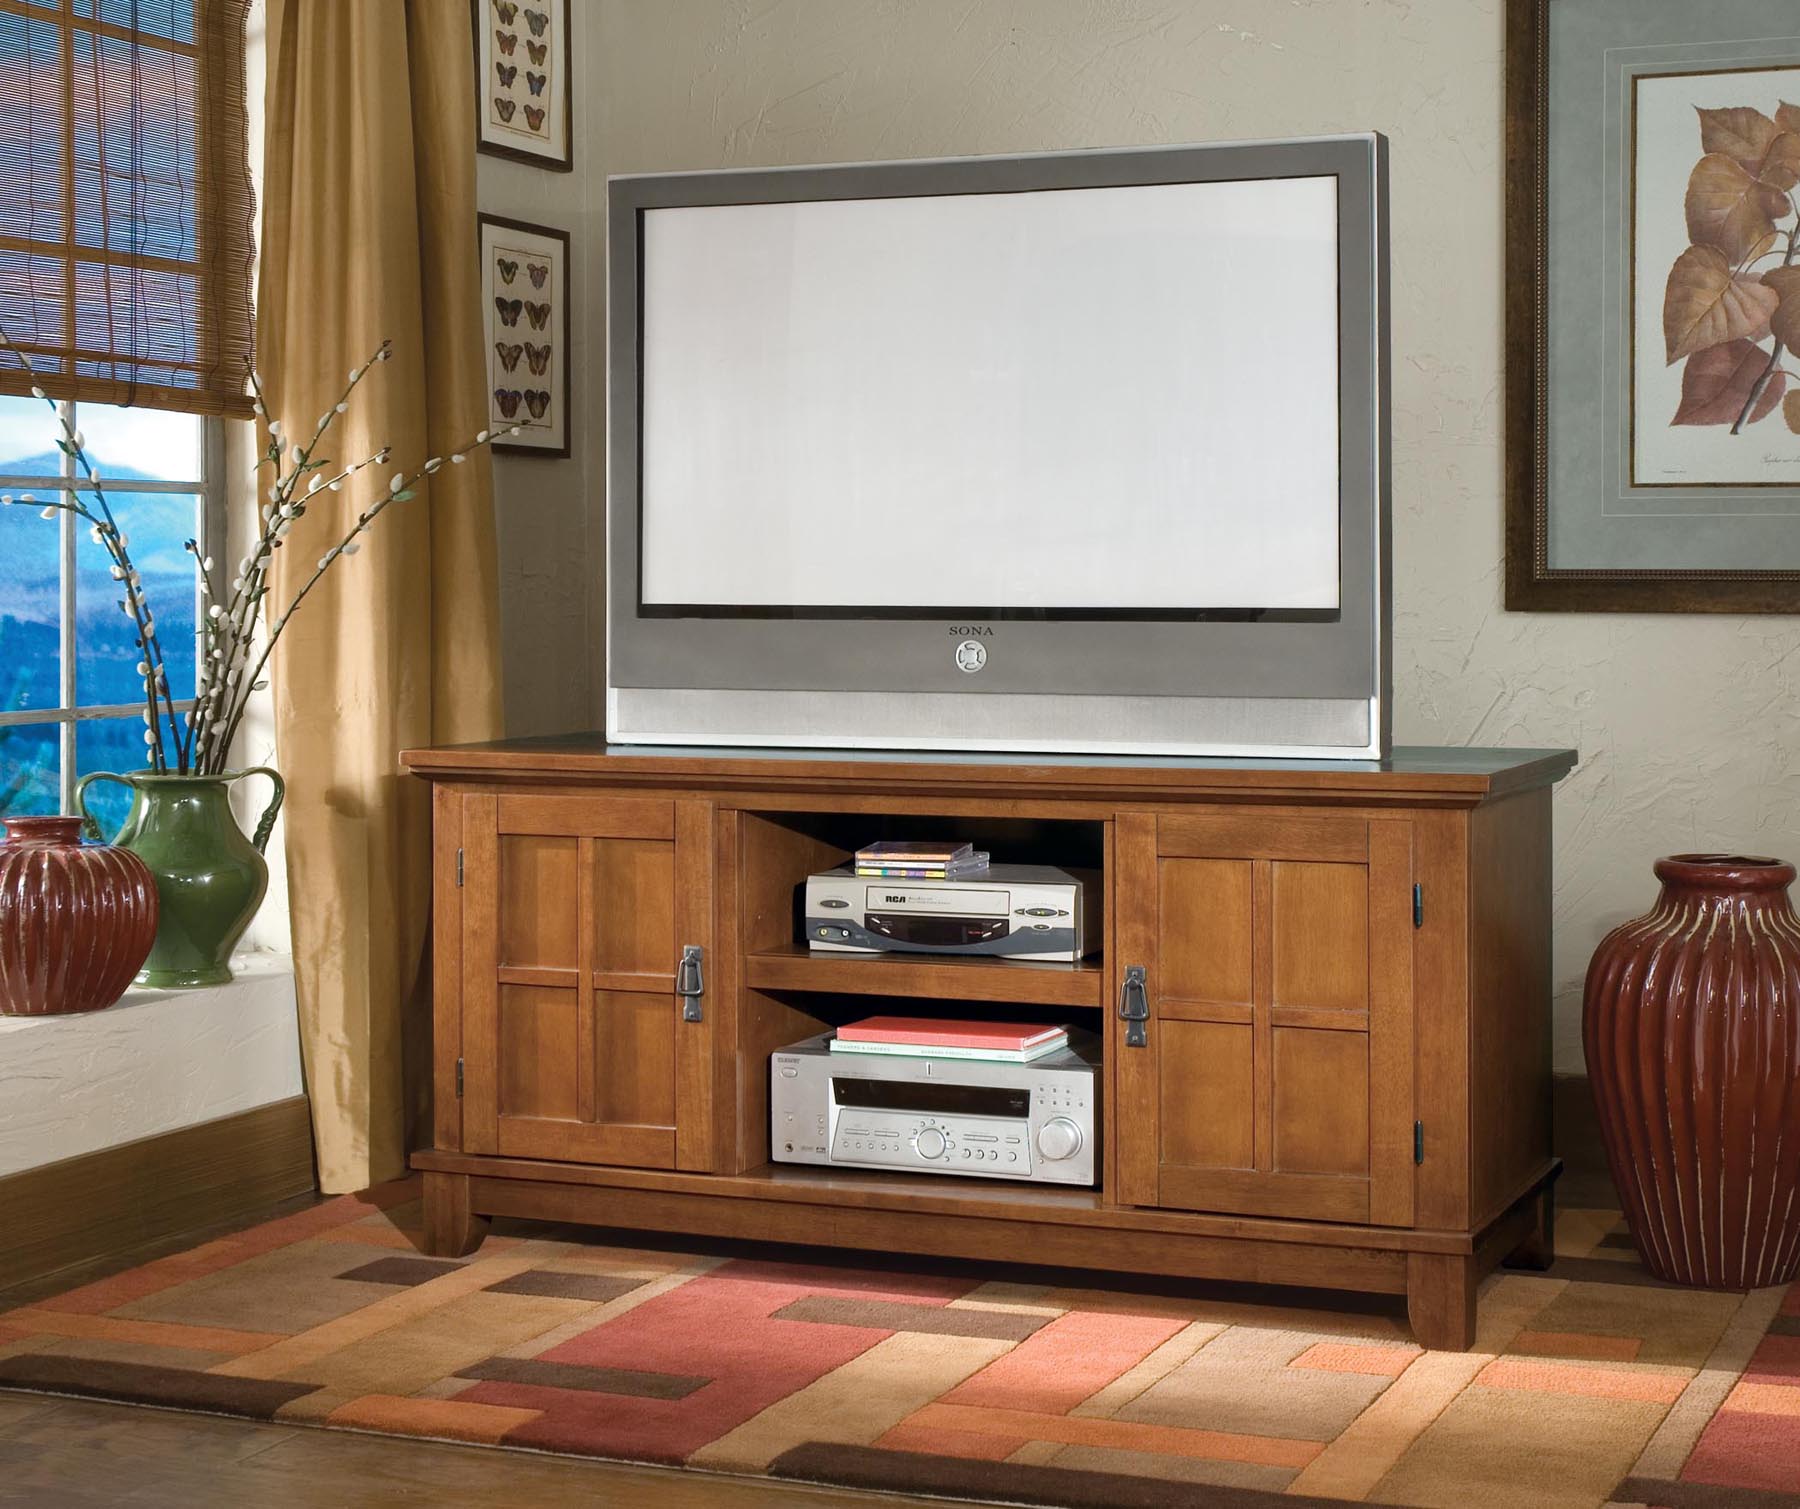 Mission style tv cabinet plans Plans DIY How to Make ...